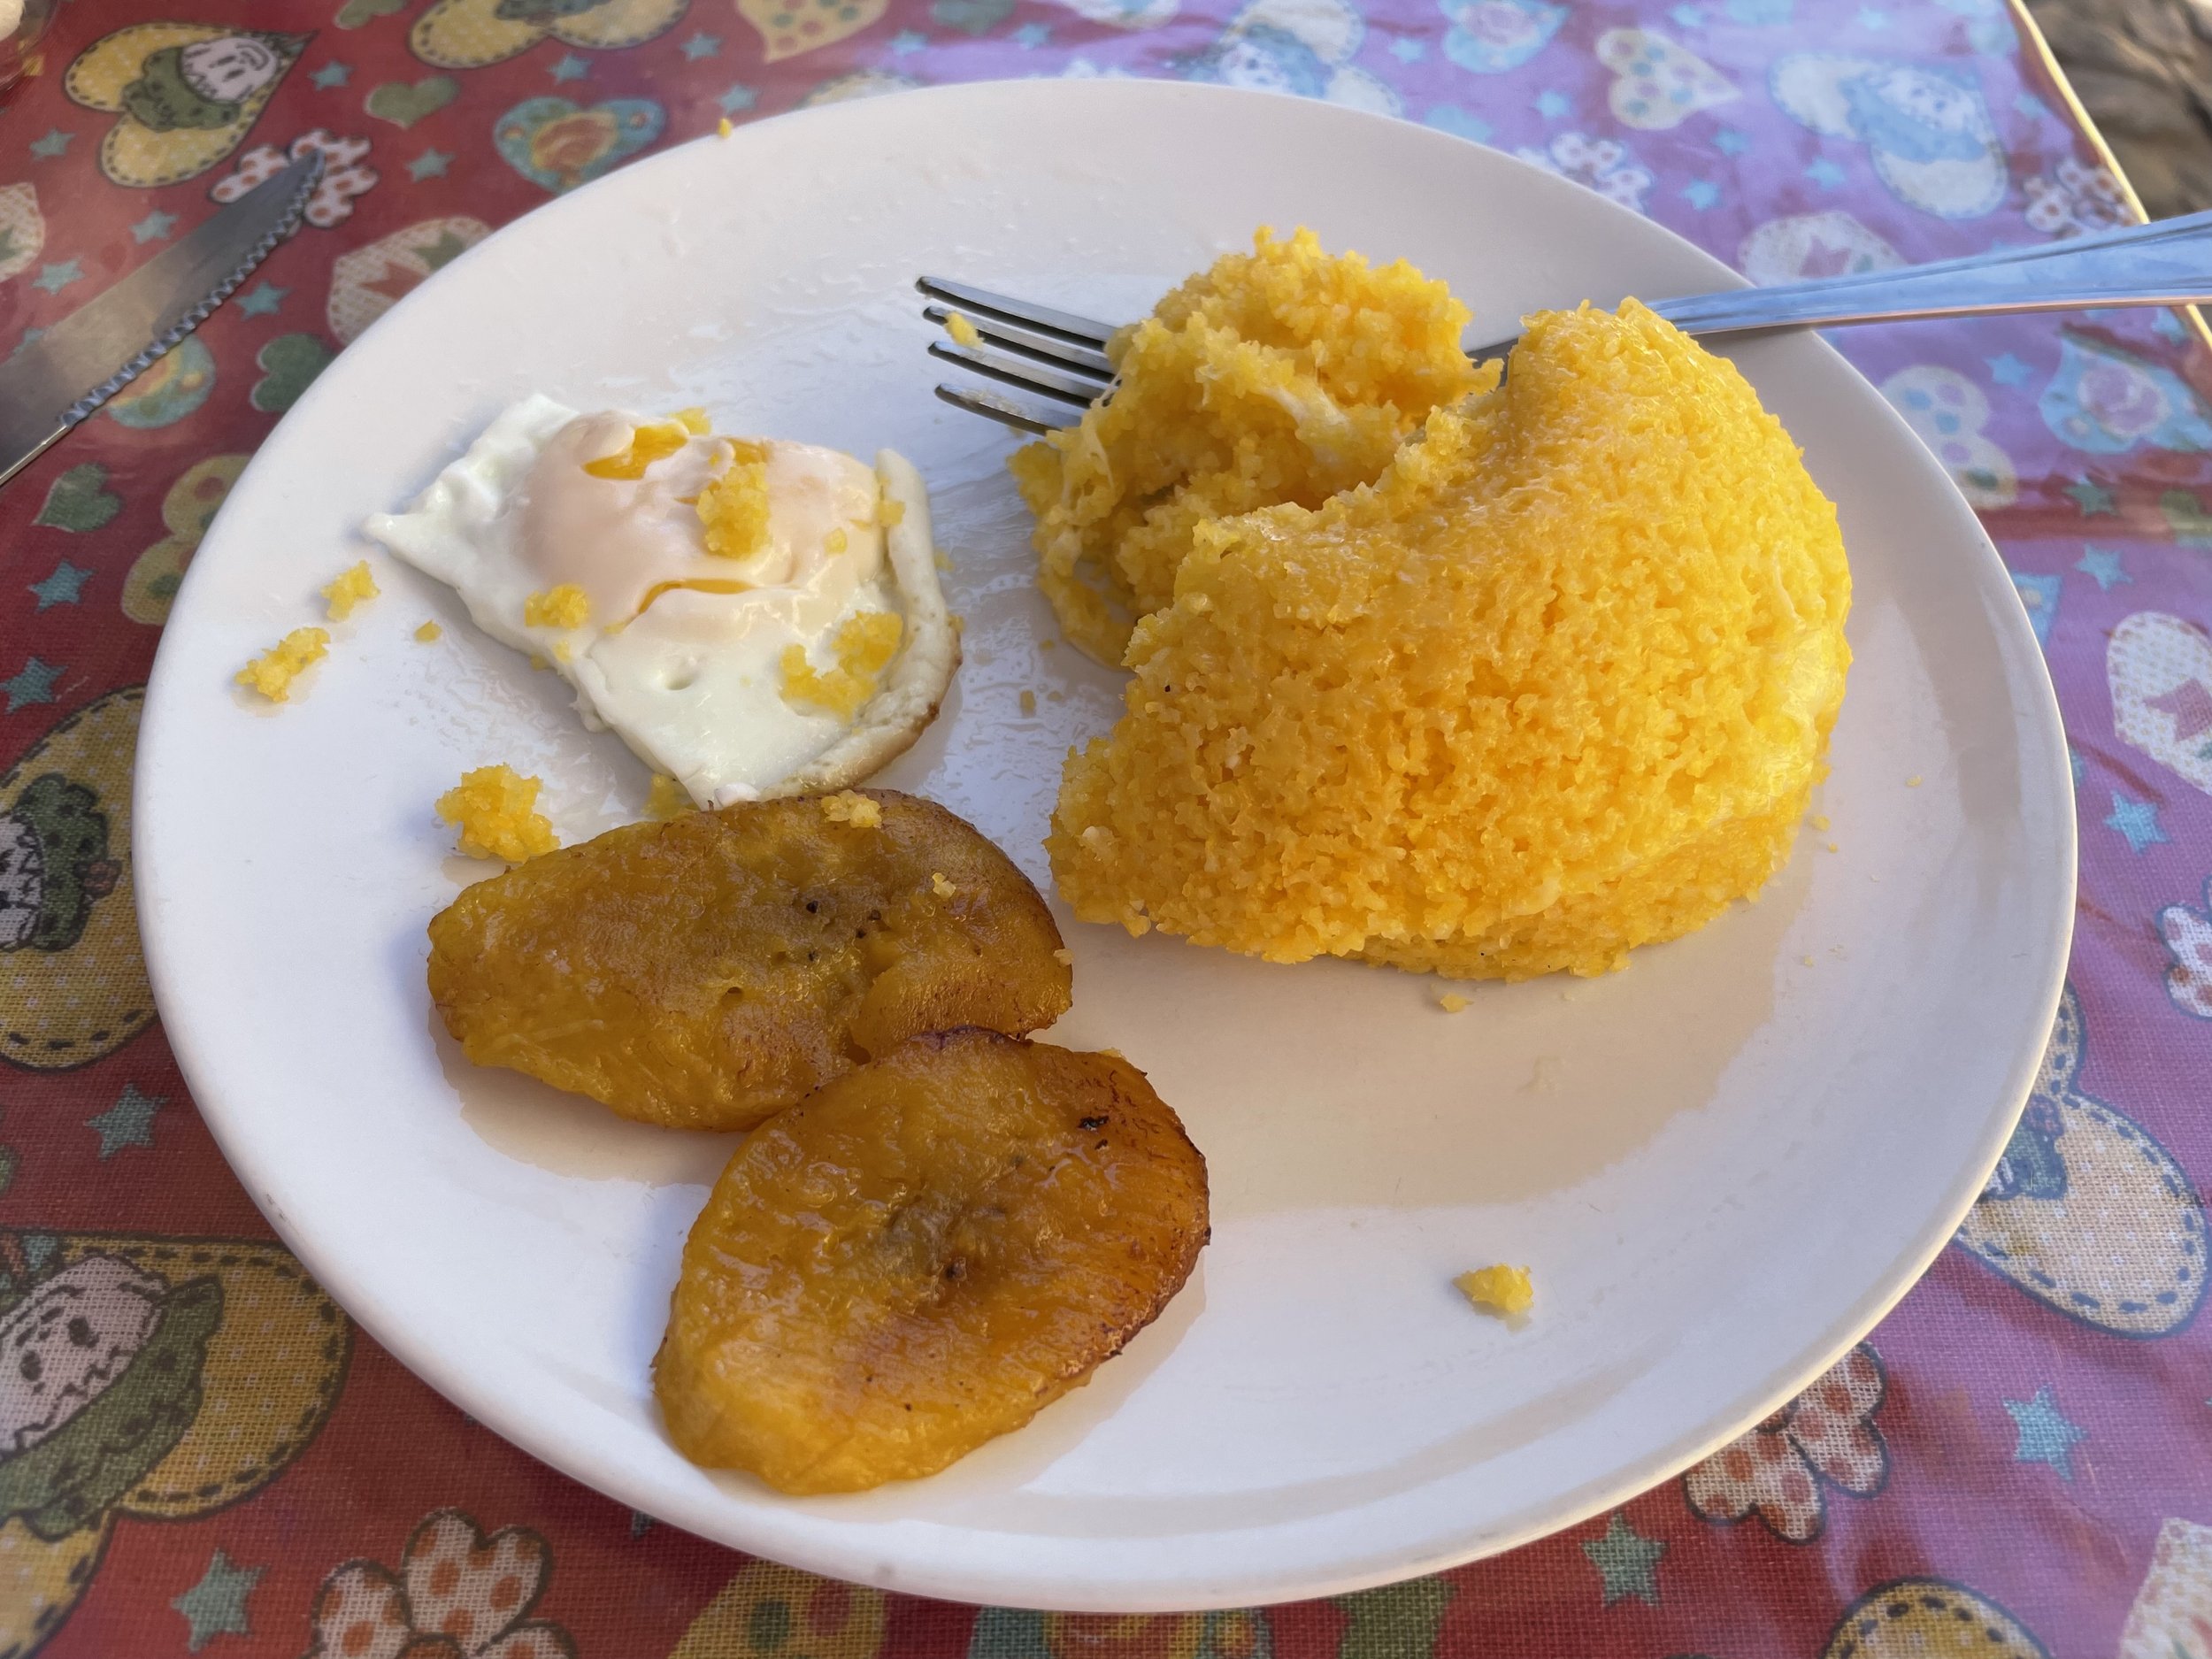 Cuscuz: The simplest can be the best. Corn meal is steamed and served with eggs and fried plantains.